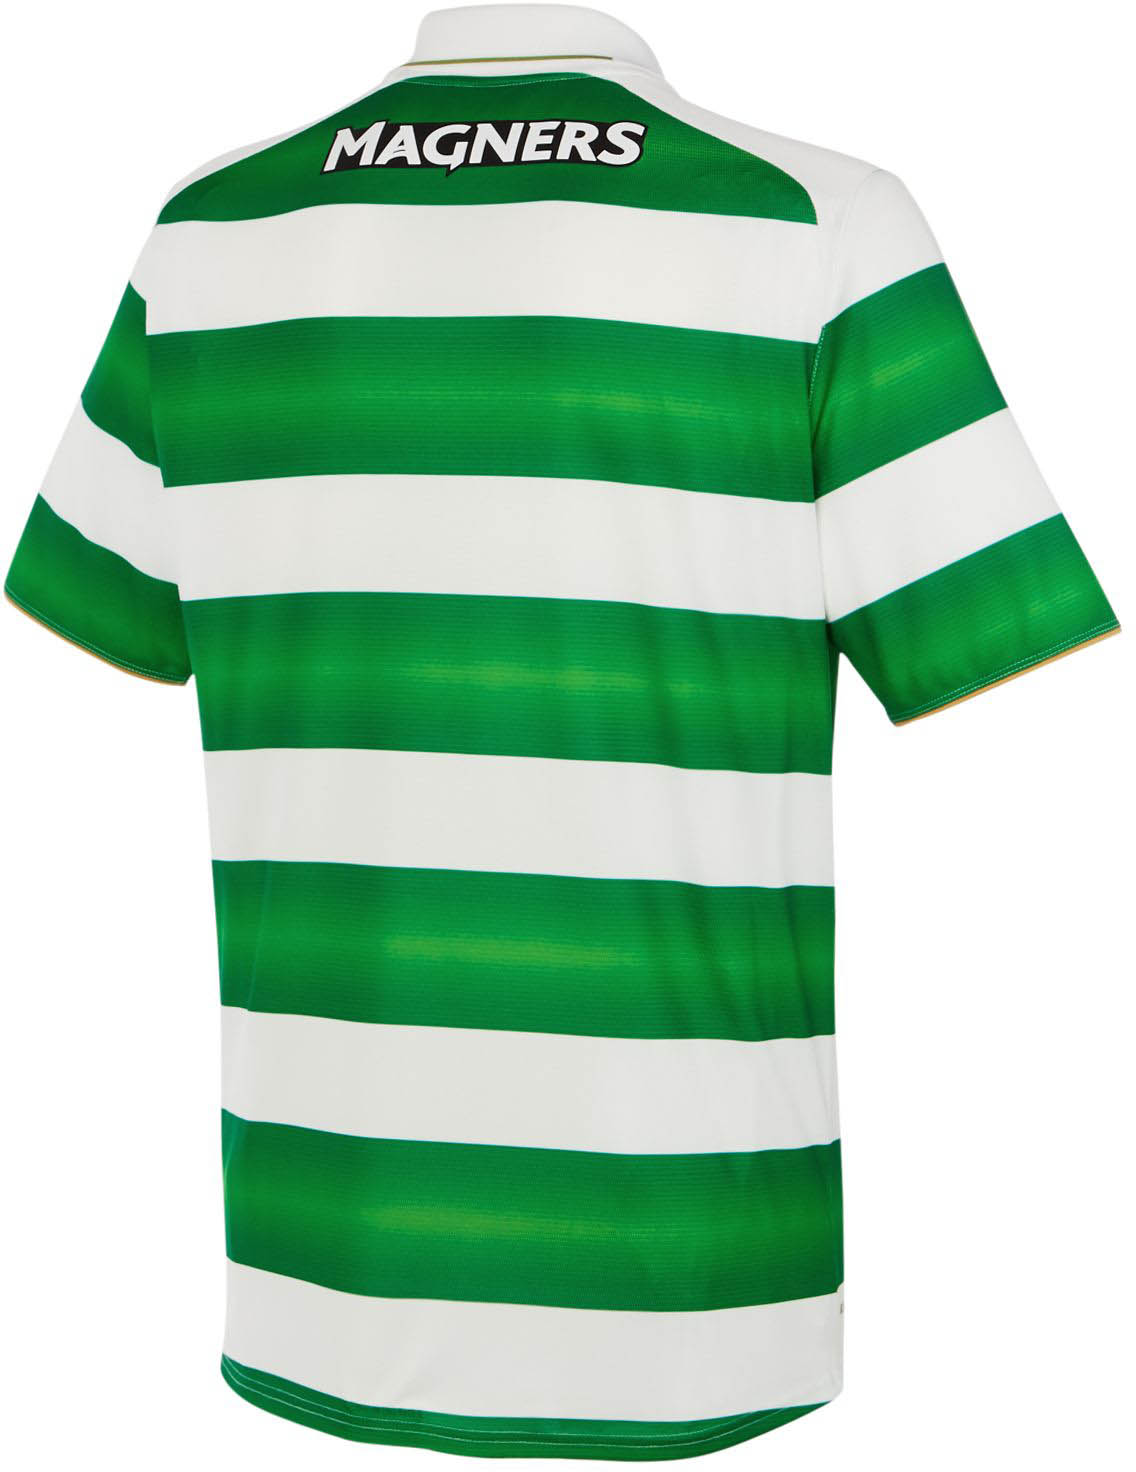 Celtic 16-17 Third Kit to Be Pink! - Footy Headlines